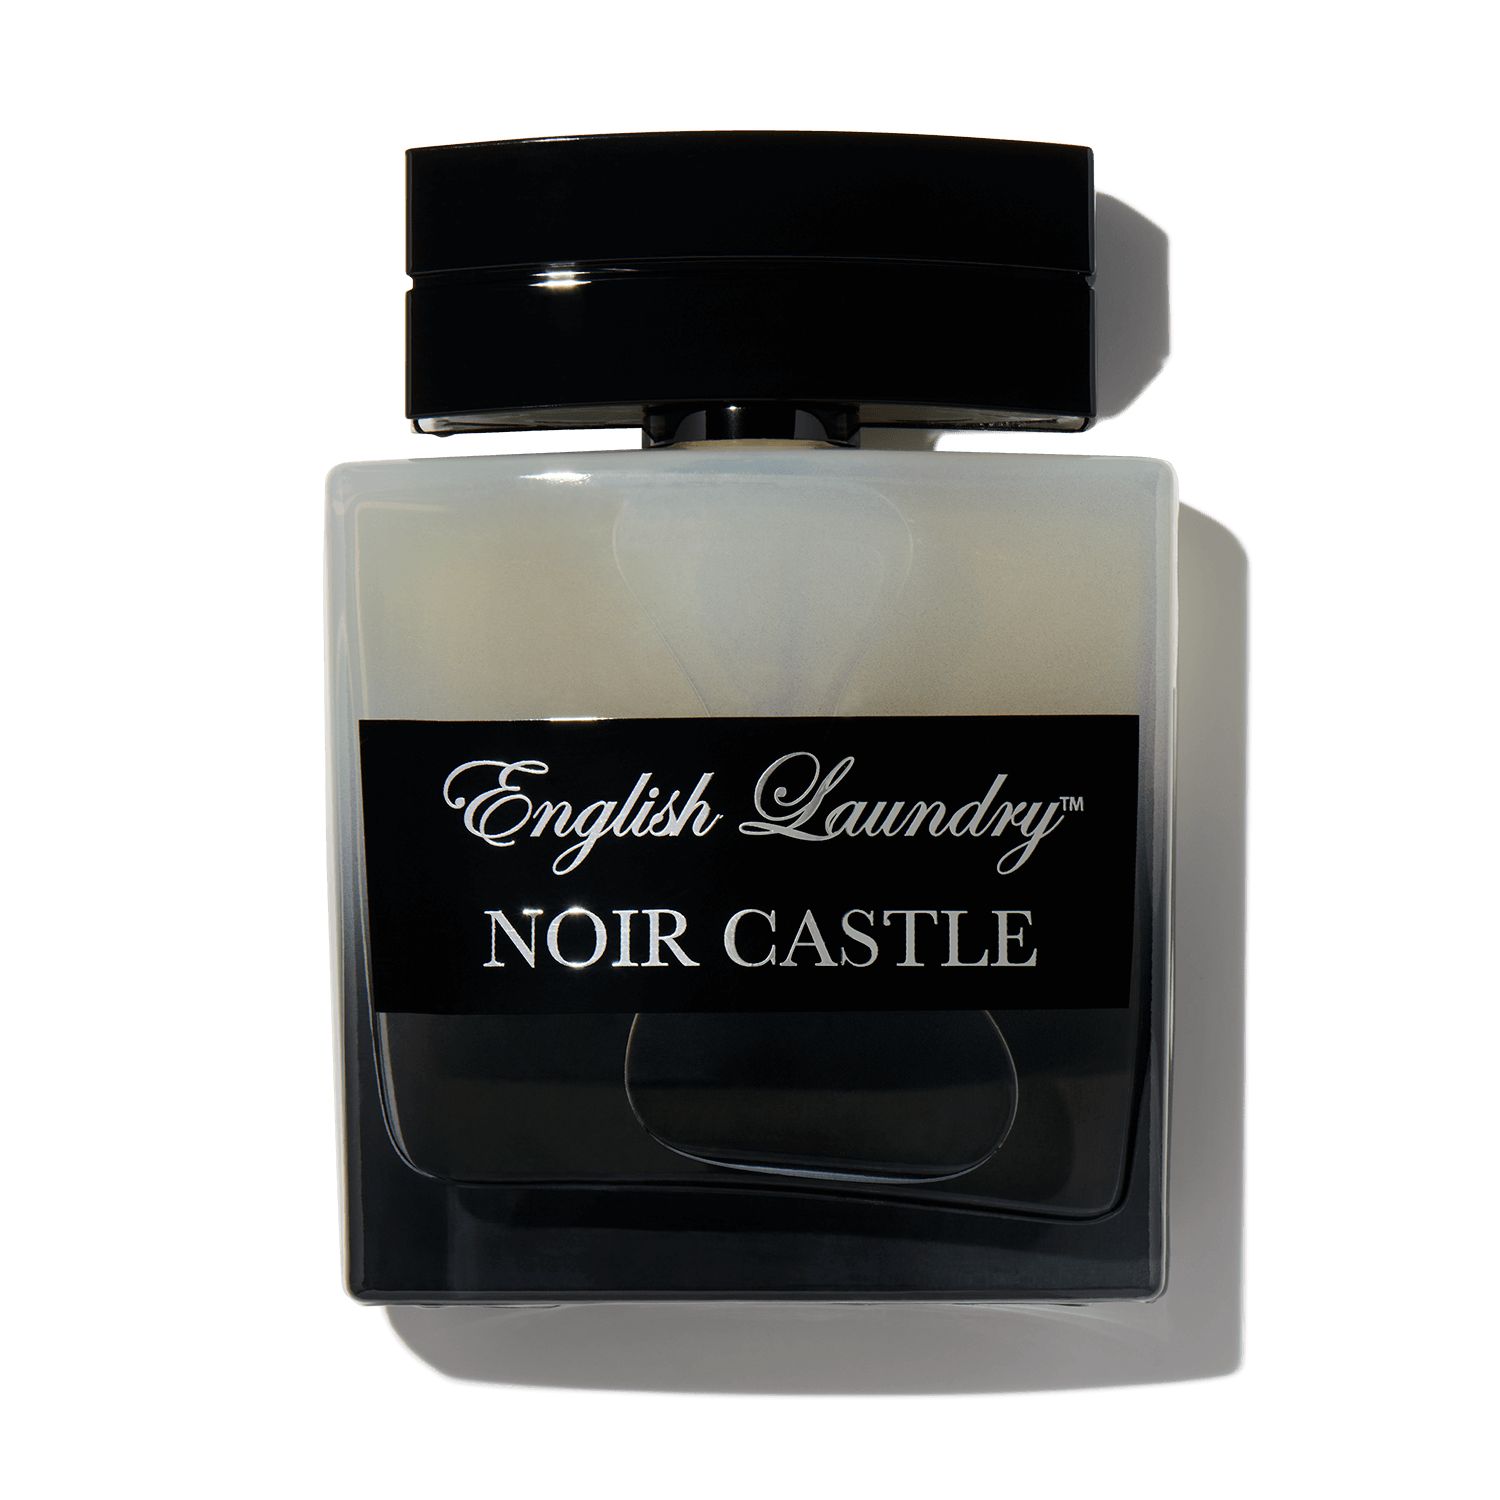 Buy ENGLISH LAUNDRY Noir Castle at Scentbird for $16.95